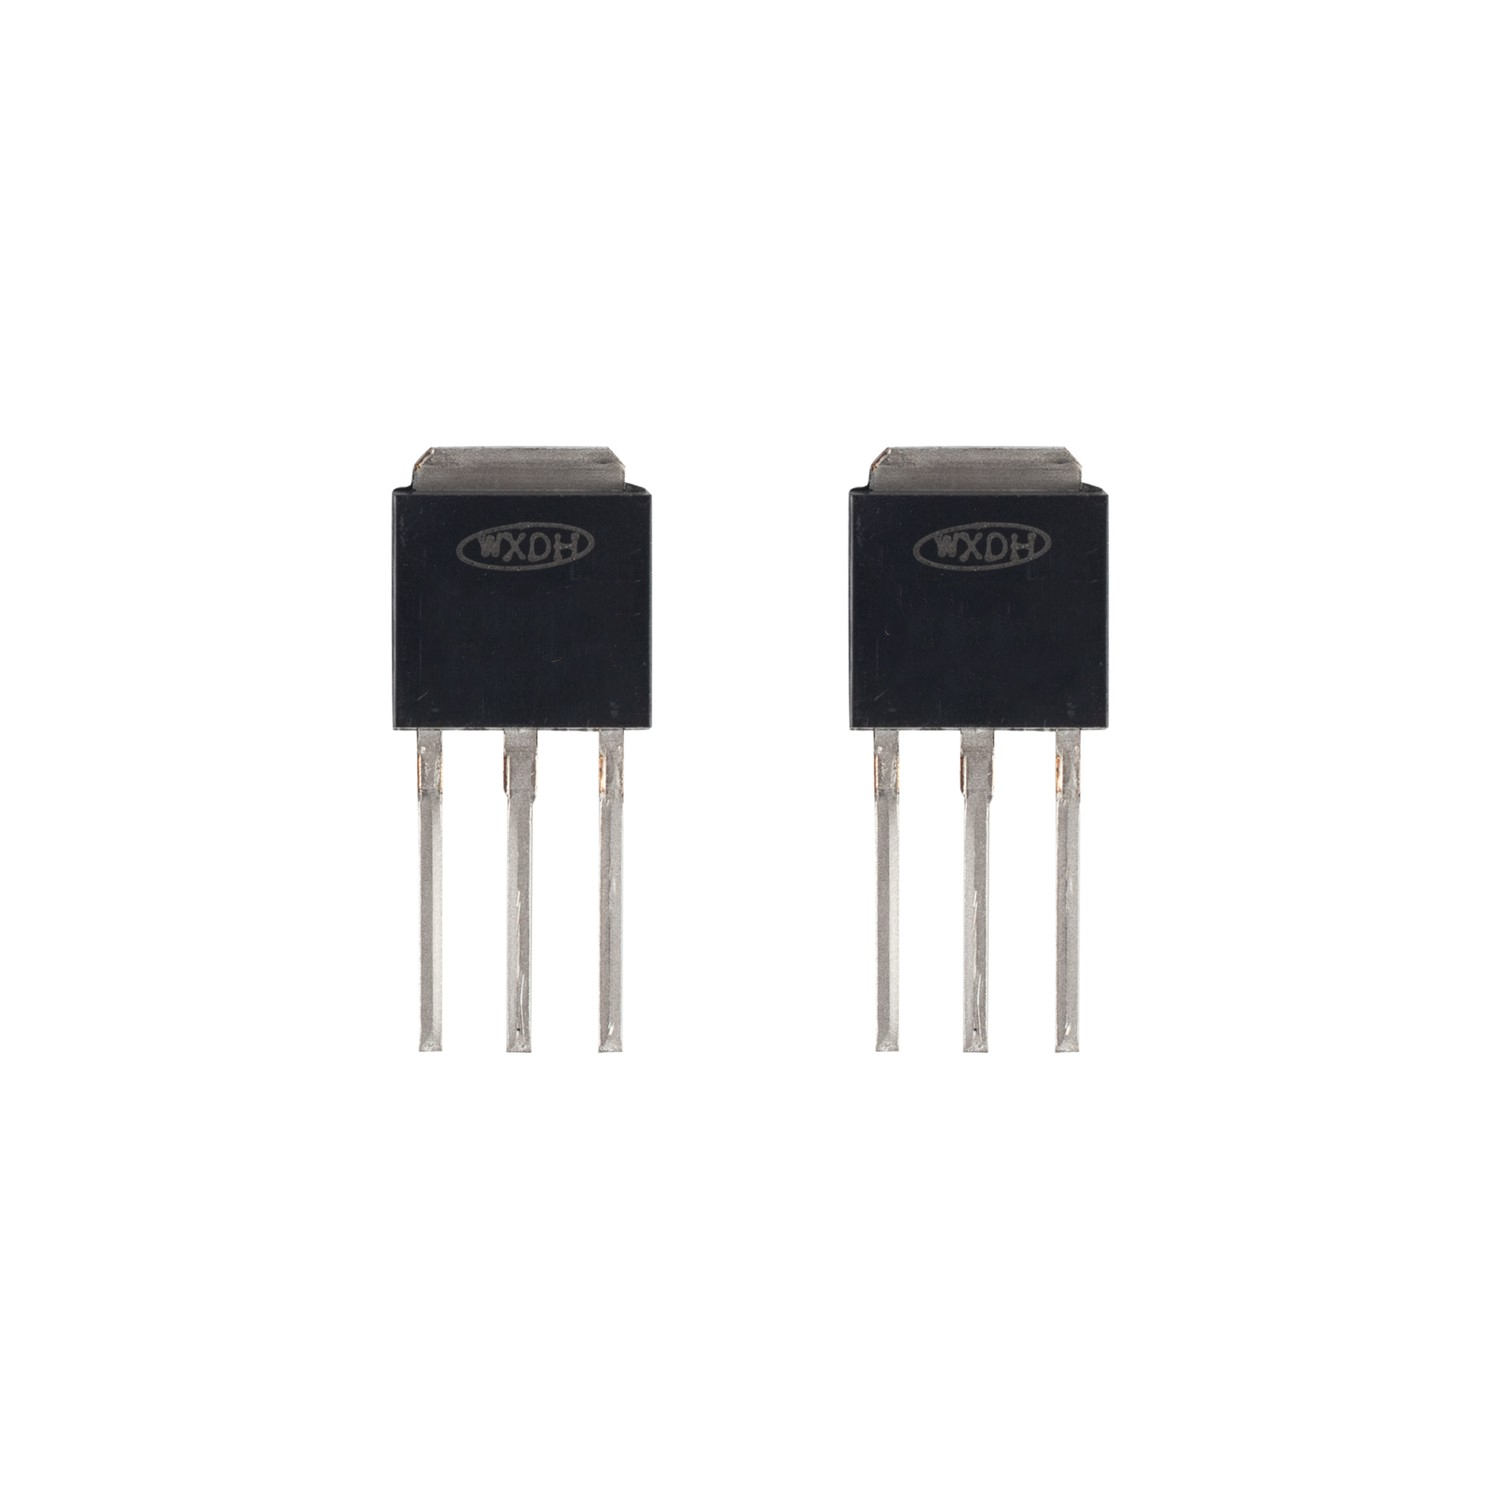  N-channel Enhancement Mode Power MOSFET 50A 30V